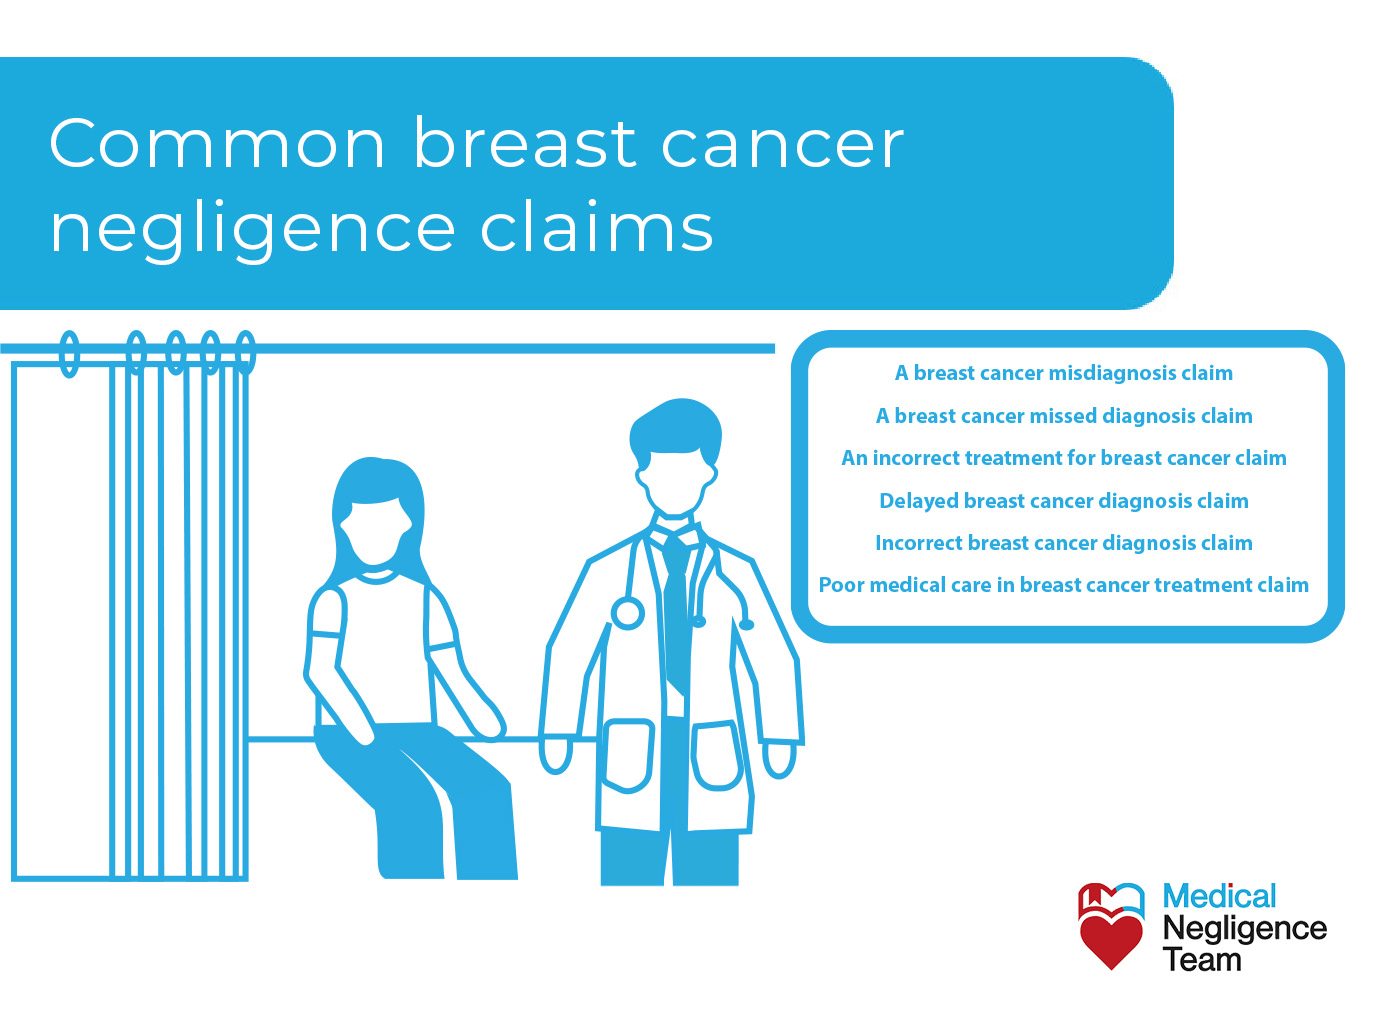 Common breast cancer negligence claims